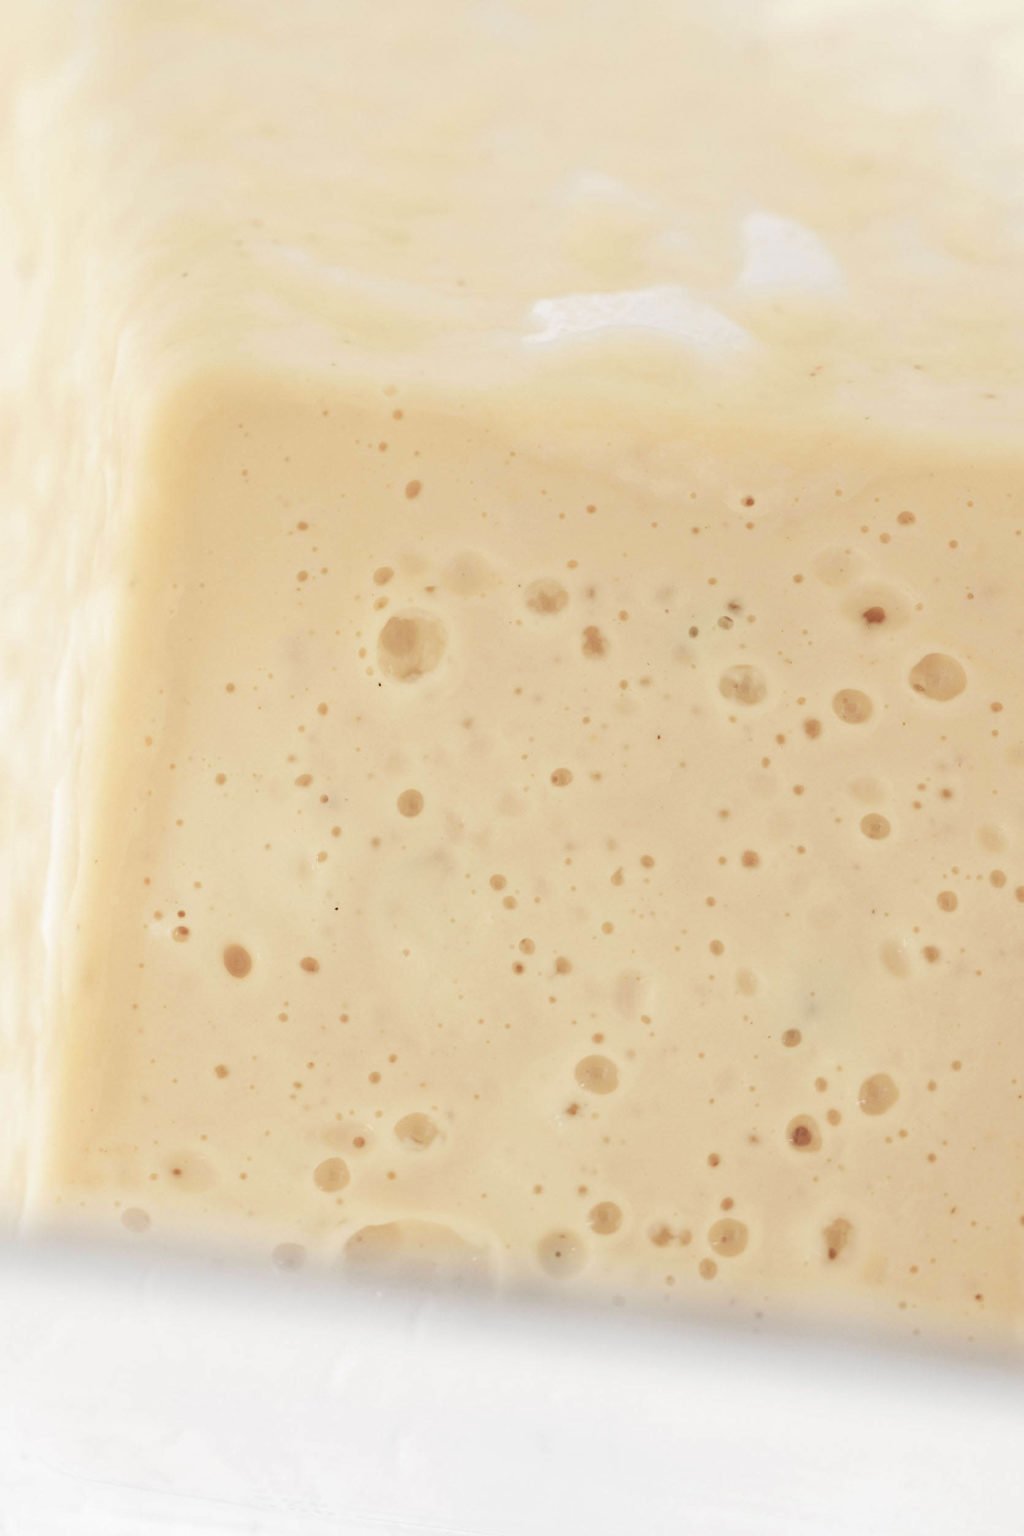 An overhead image of a creamy, white sauce, which has just been prepared in a blender.